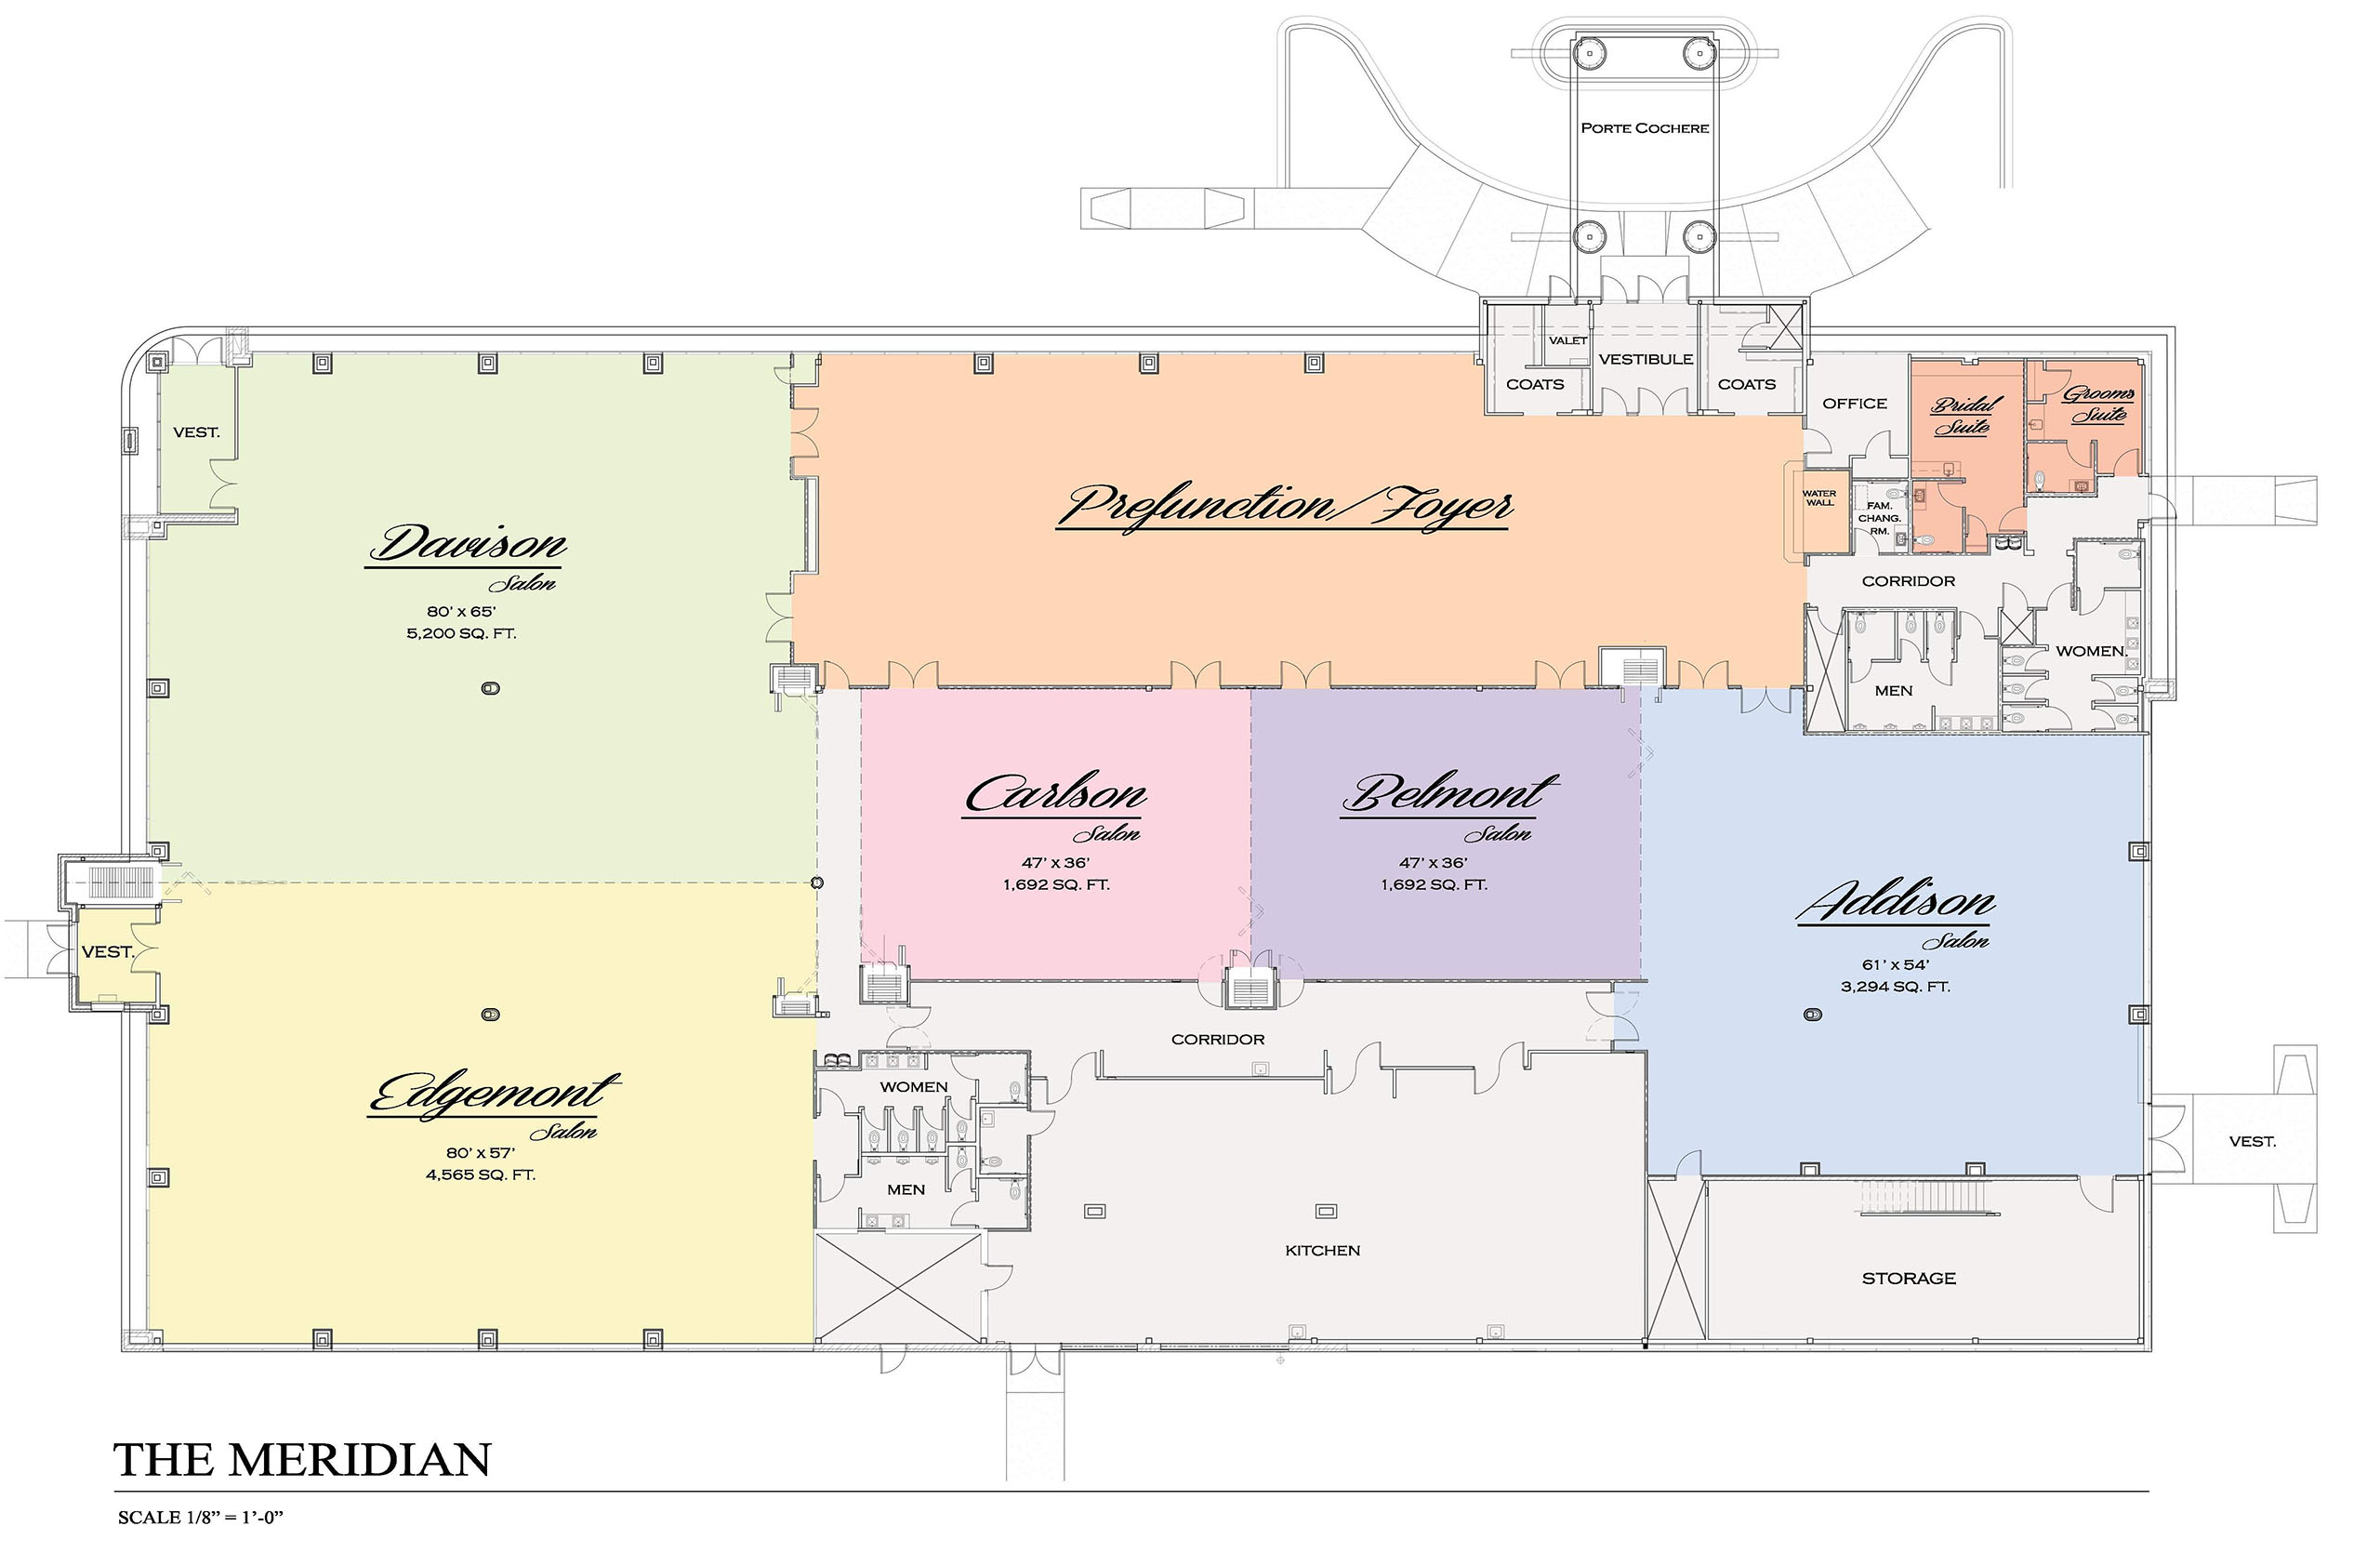 A floor plan of the building with several different colors.